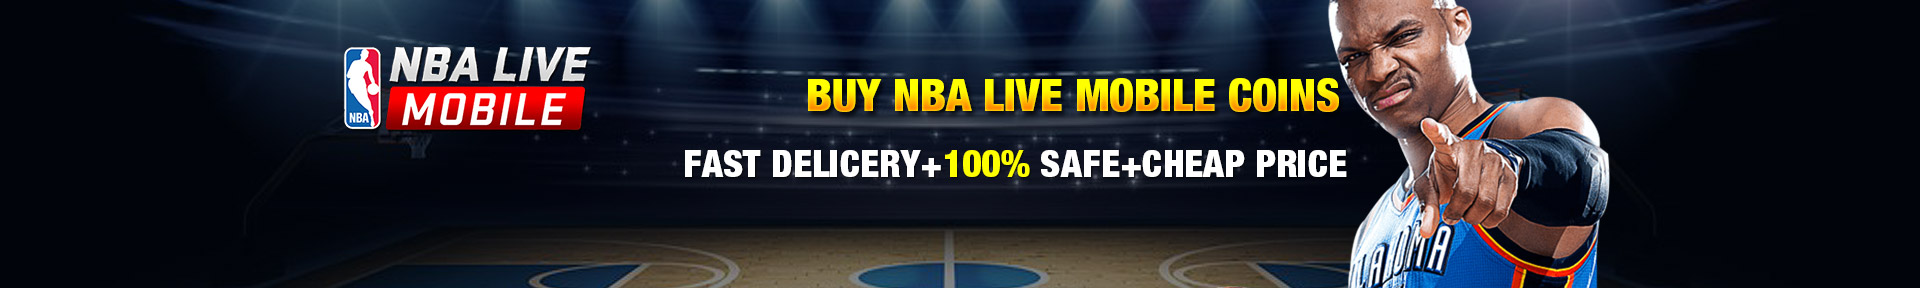 Android Nba Live Mobile 19 Account 5mmo Com - robux 5mmo